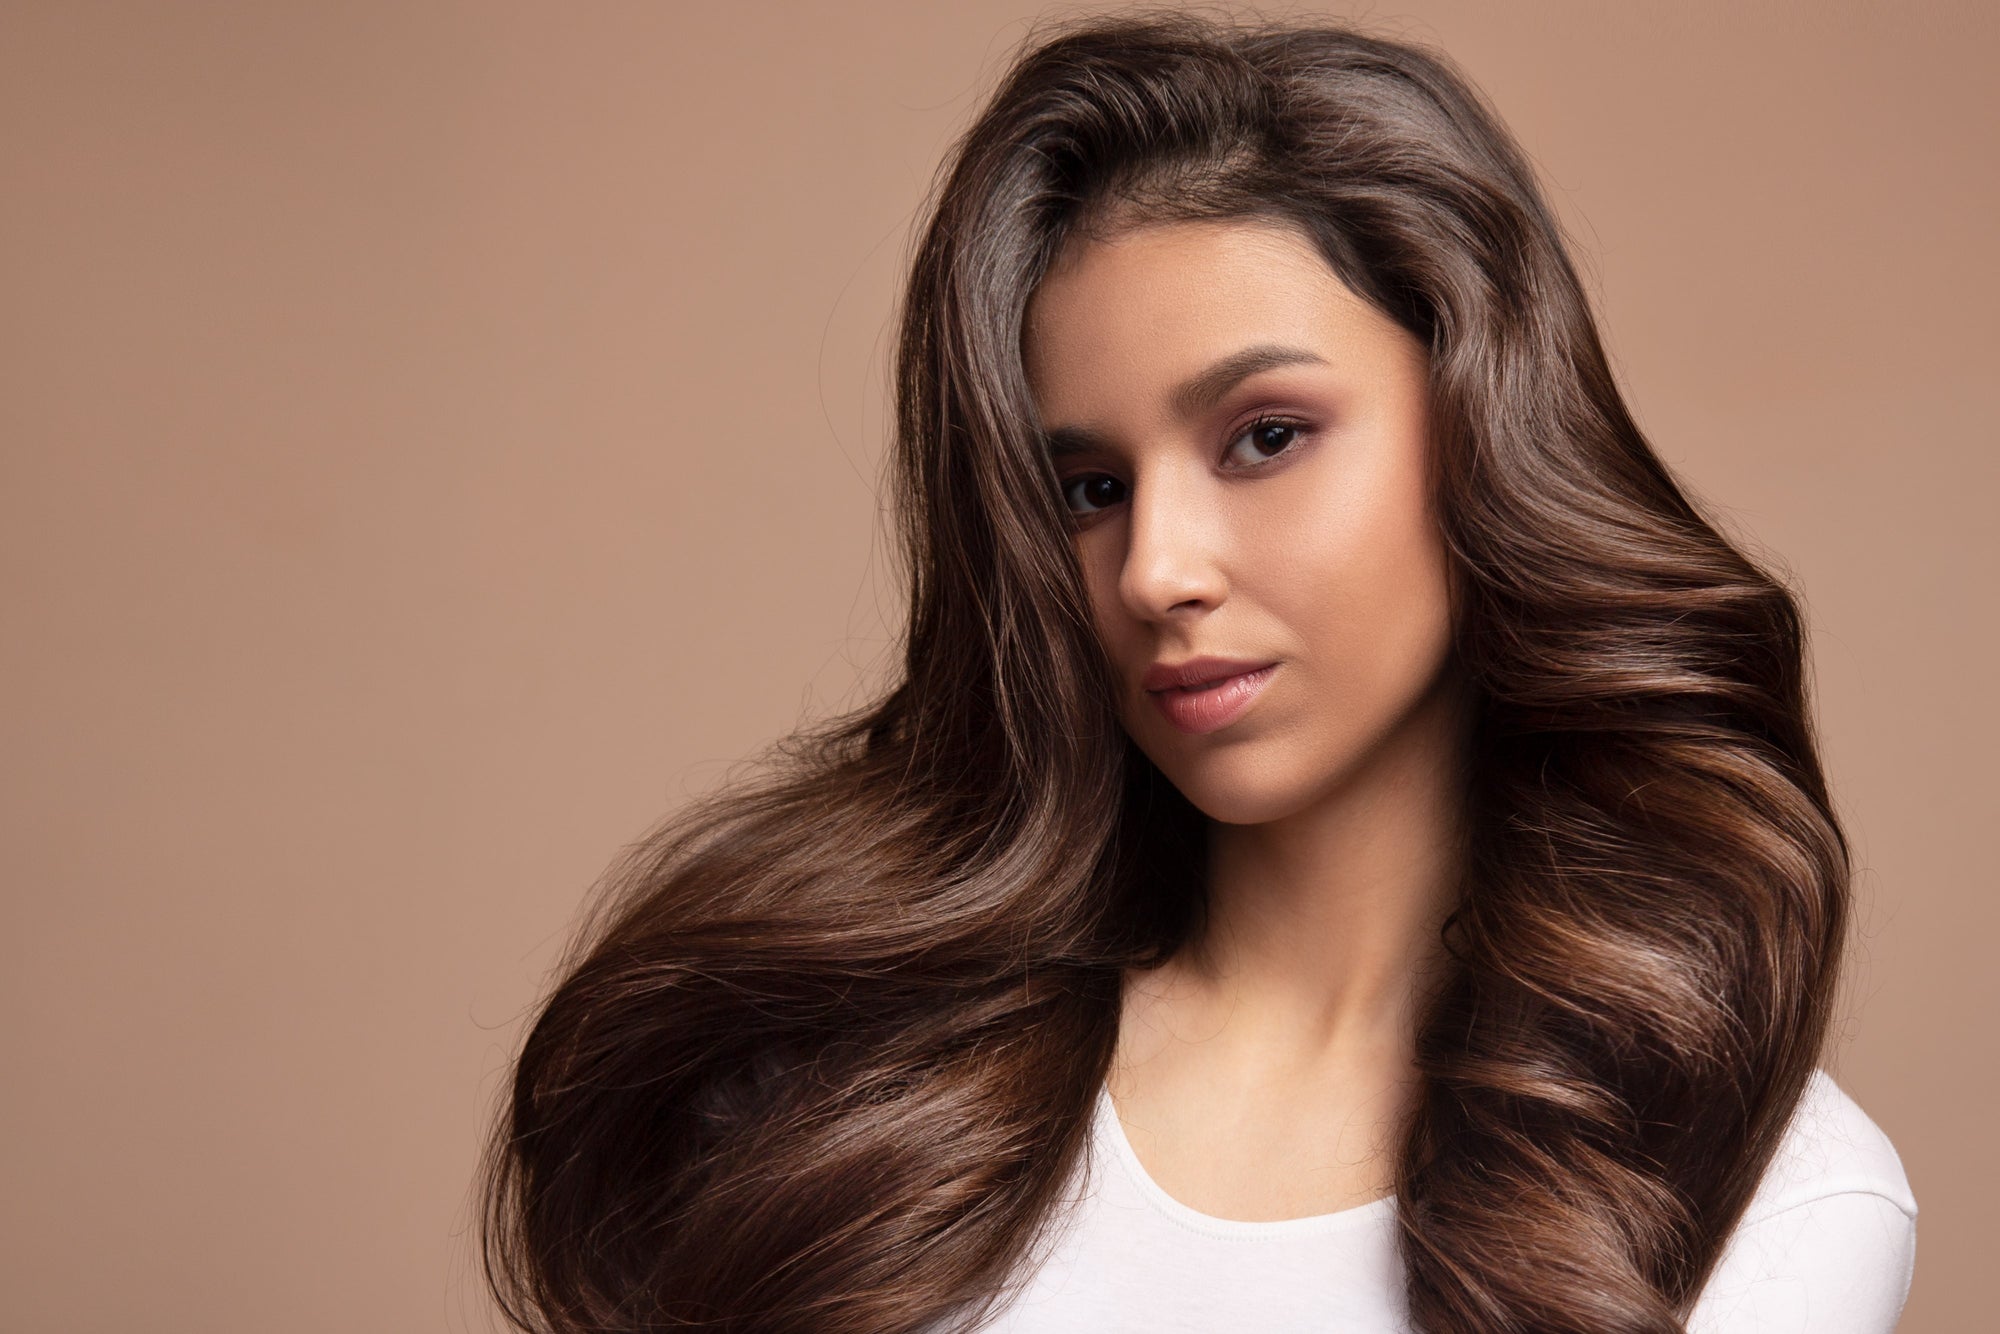 4 Proven Tips for Boosting The Appearance of Hair Volume and Confidence with RapidHair